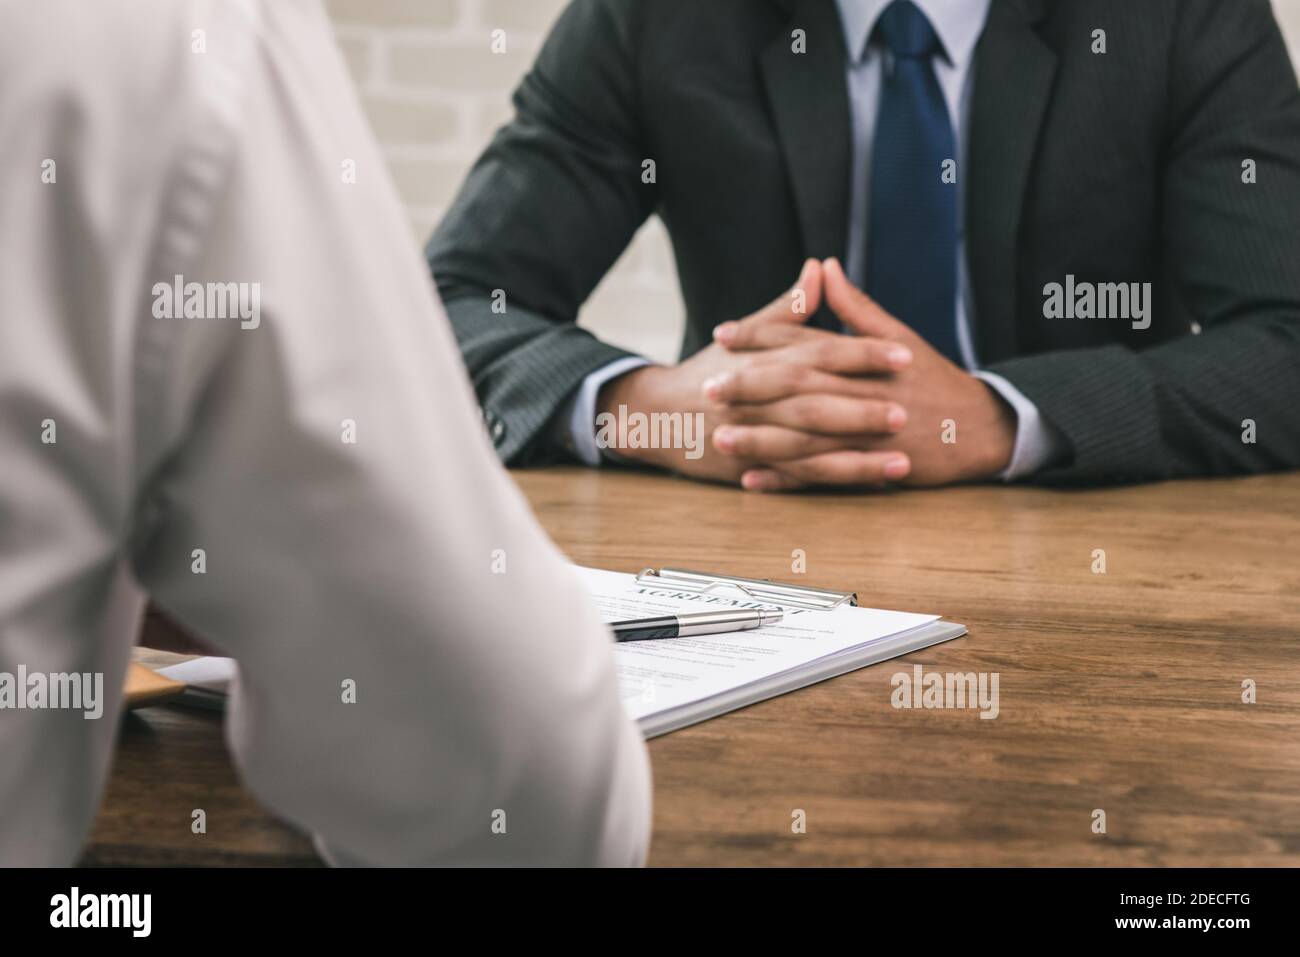 Business partner making contract agreement  with document on the table in the office Stock Photo